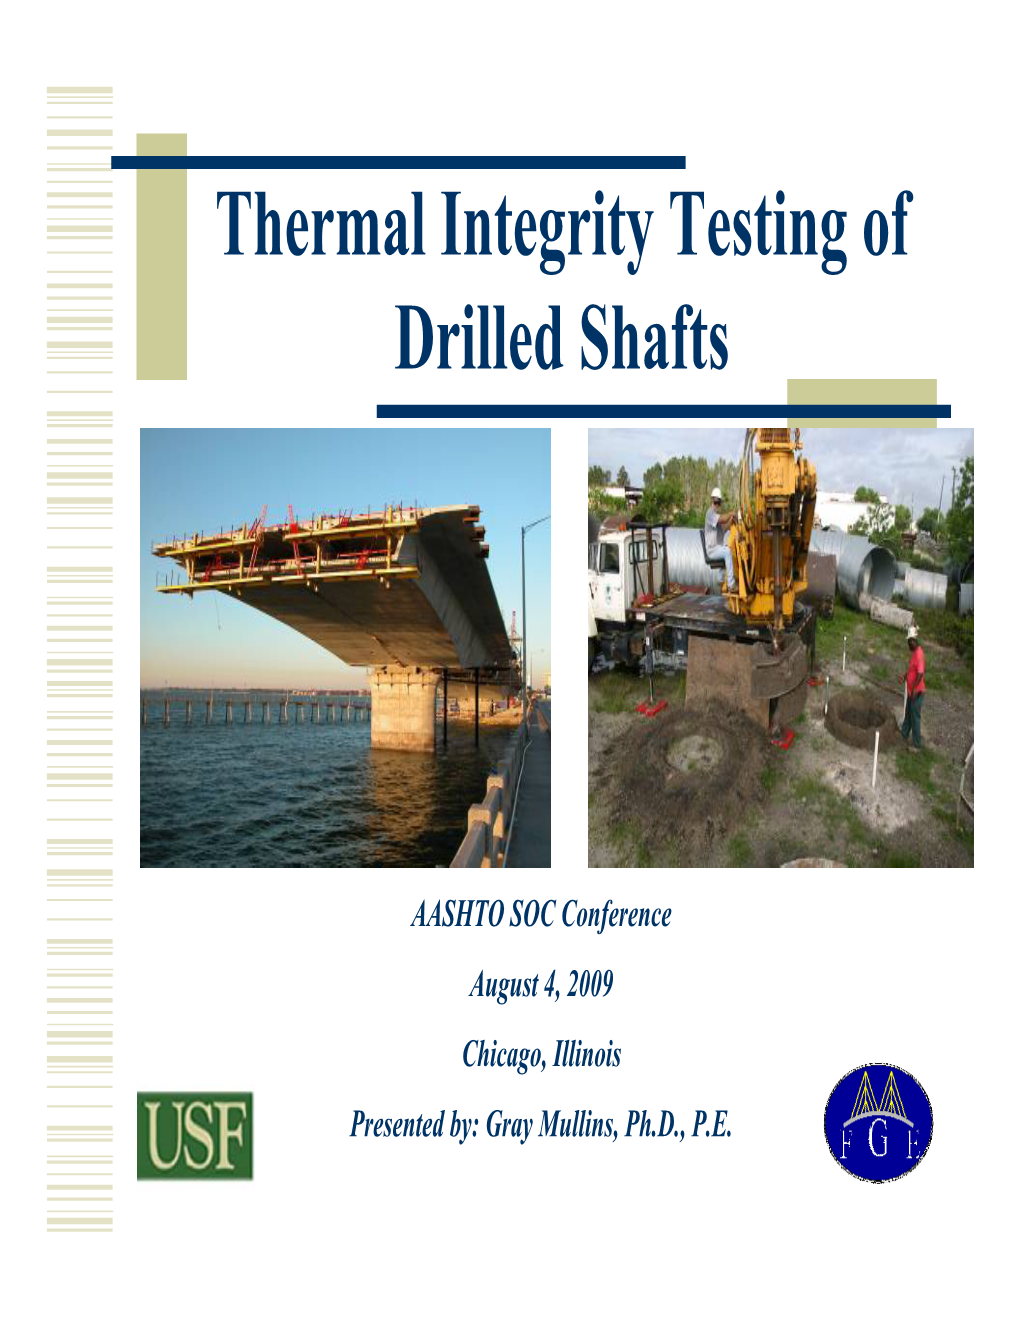 Thermal Integrity Testing of Drilled Shafts